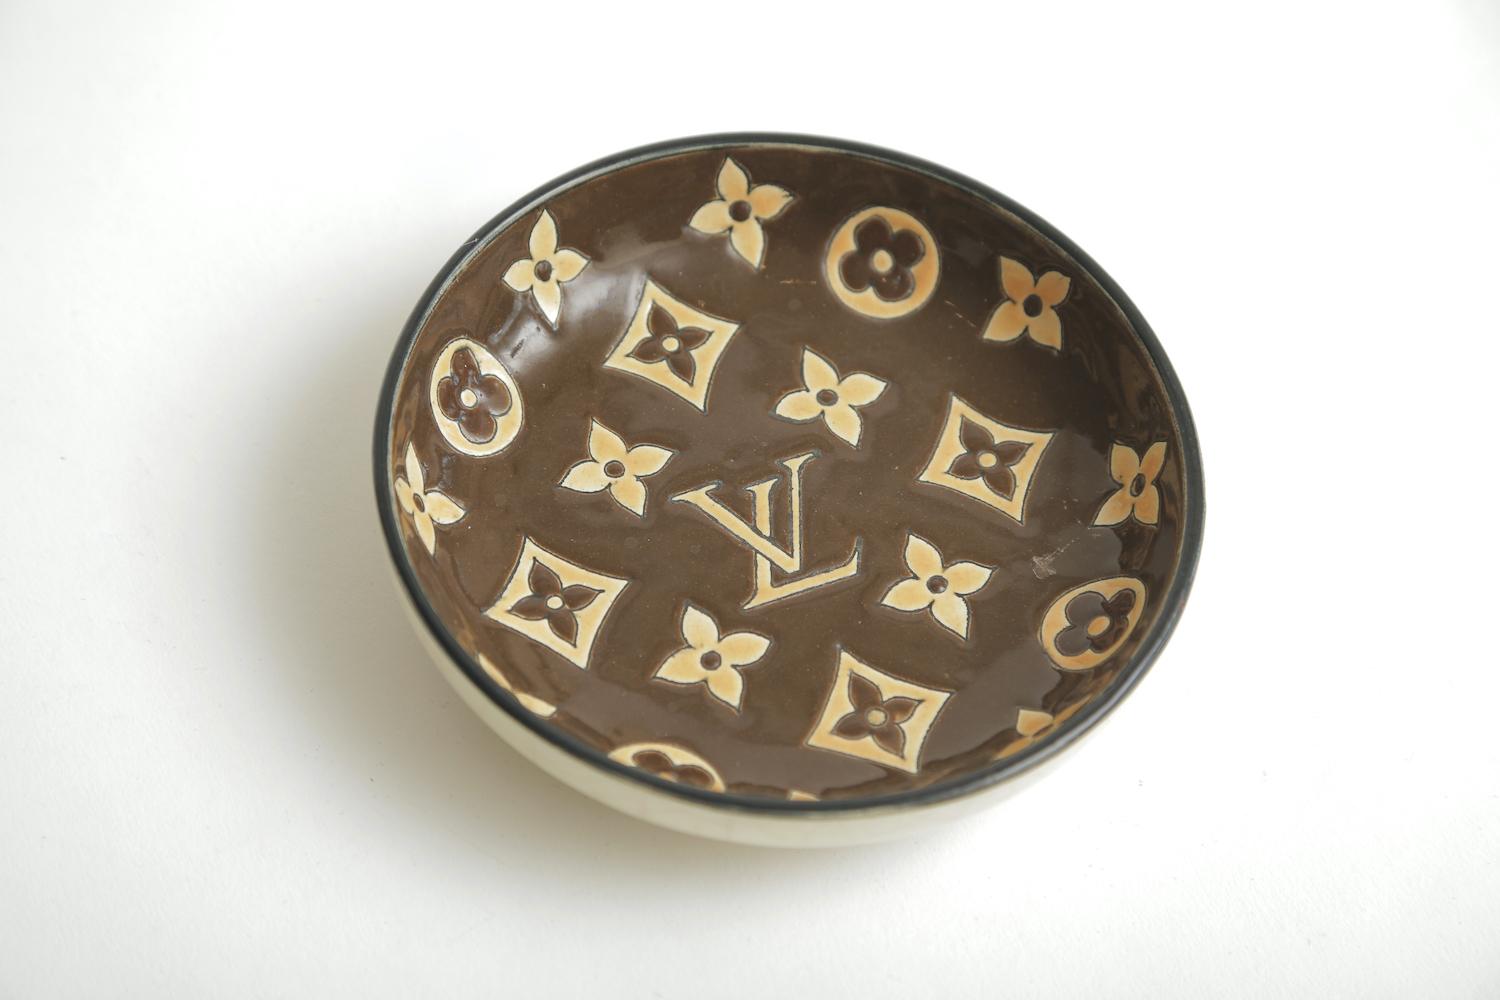 Louis Vuitton Bowl - 6 For Sale on 1stDibs